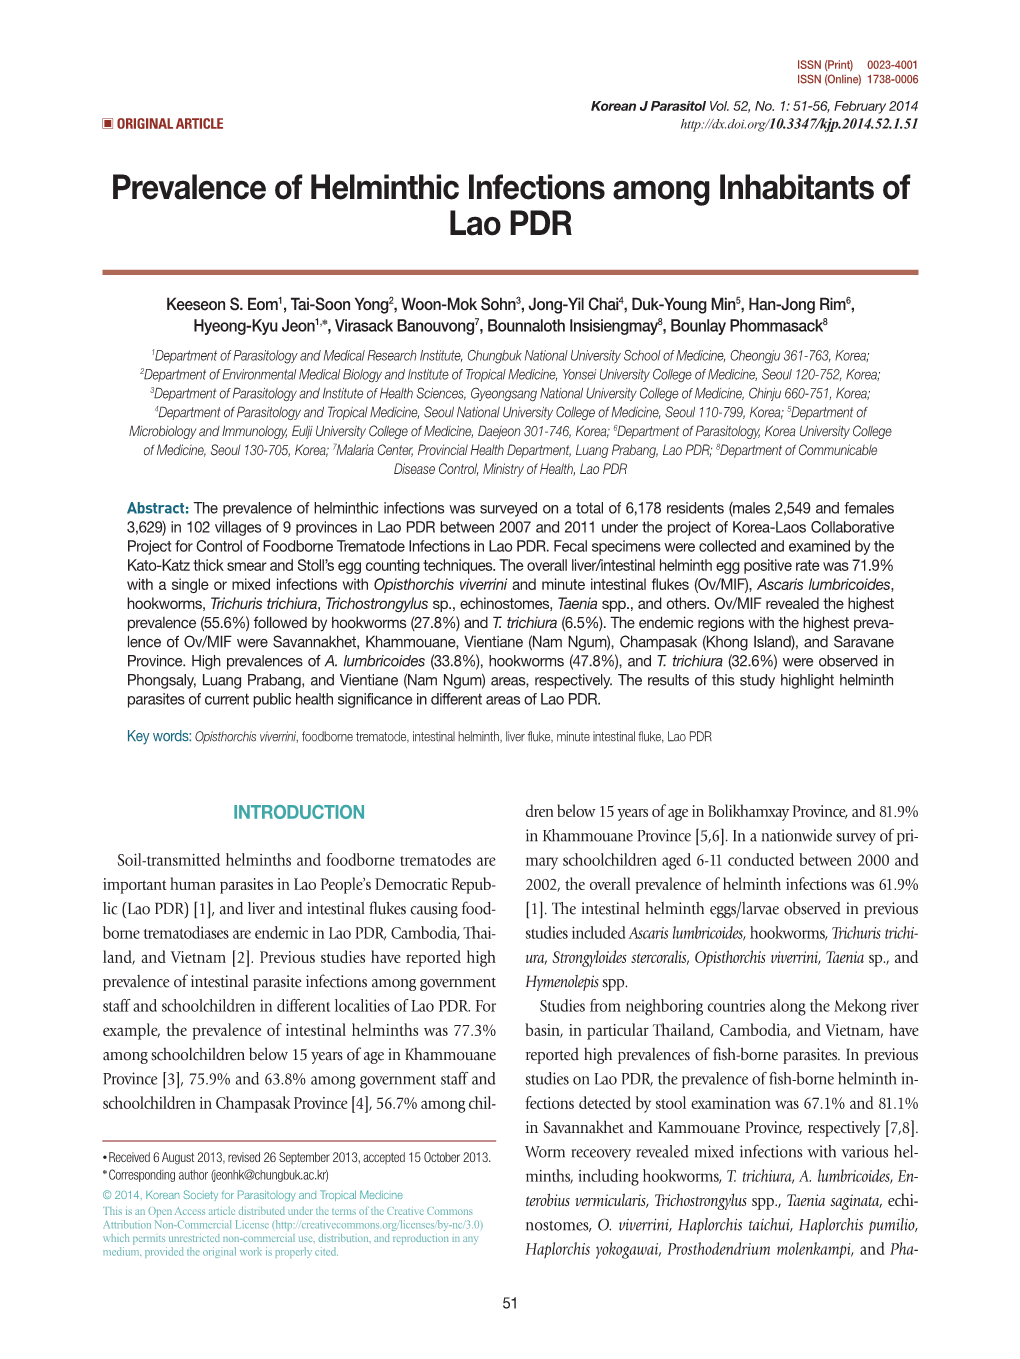 Prevalence of Helminthic Infections Among Inhabitants of Lao PDR